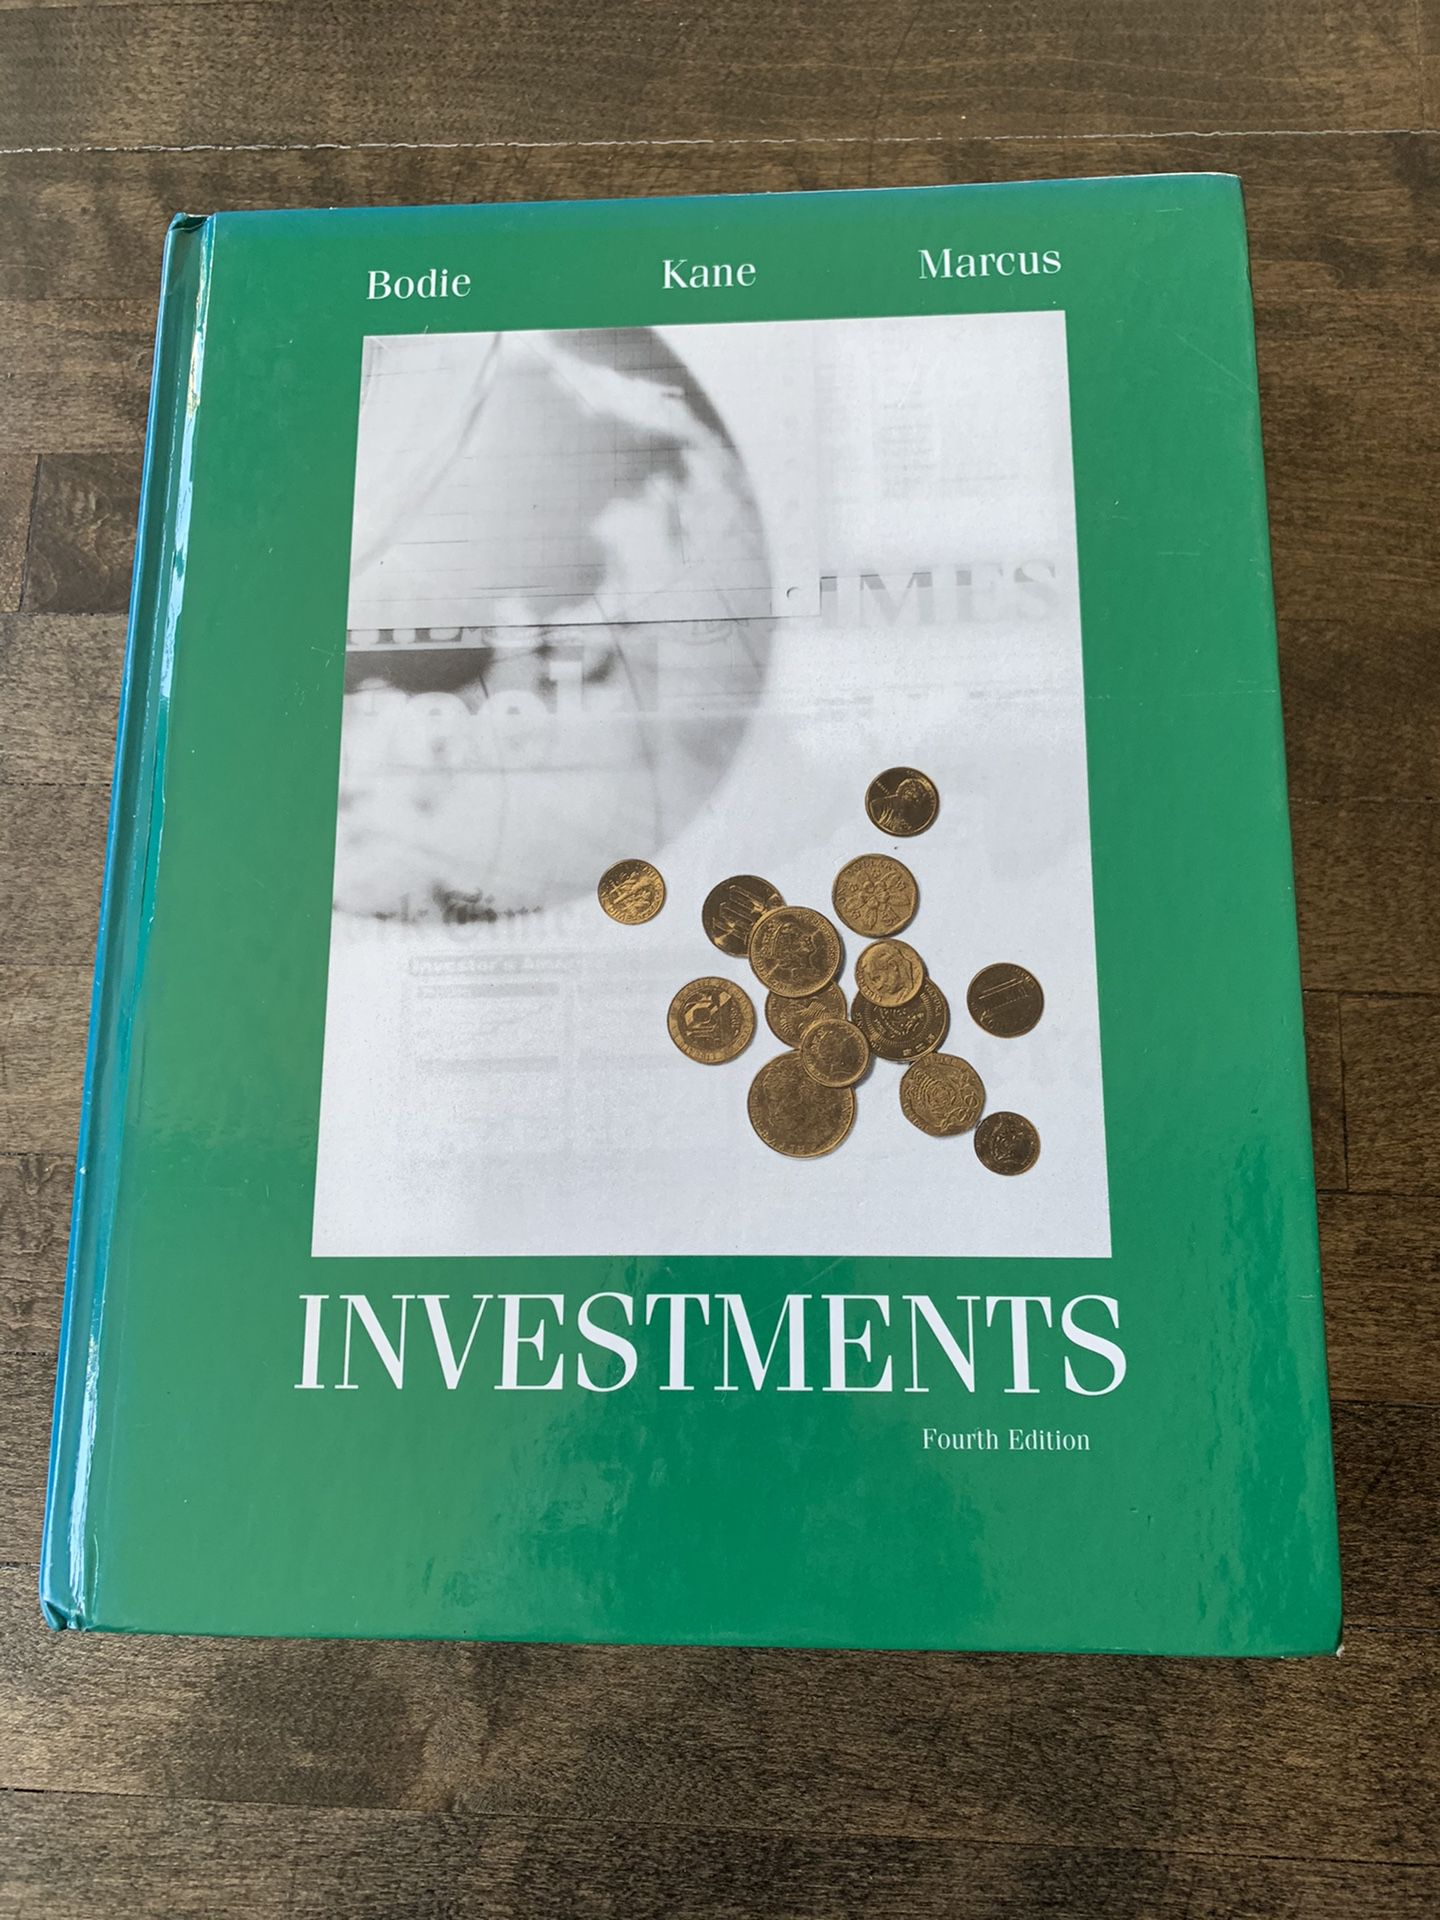 Investments - Bodie, Kane, Marcus - 4th edition hardcover